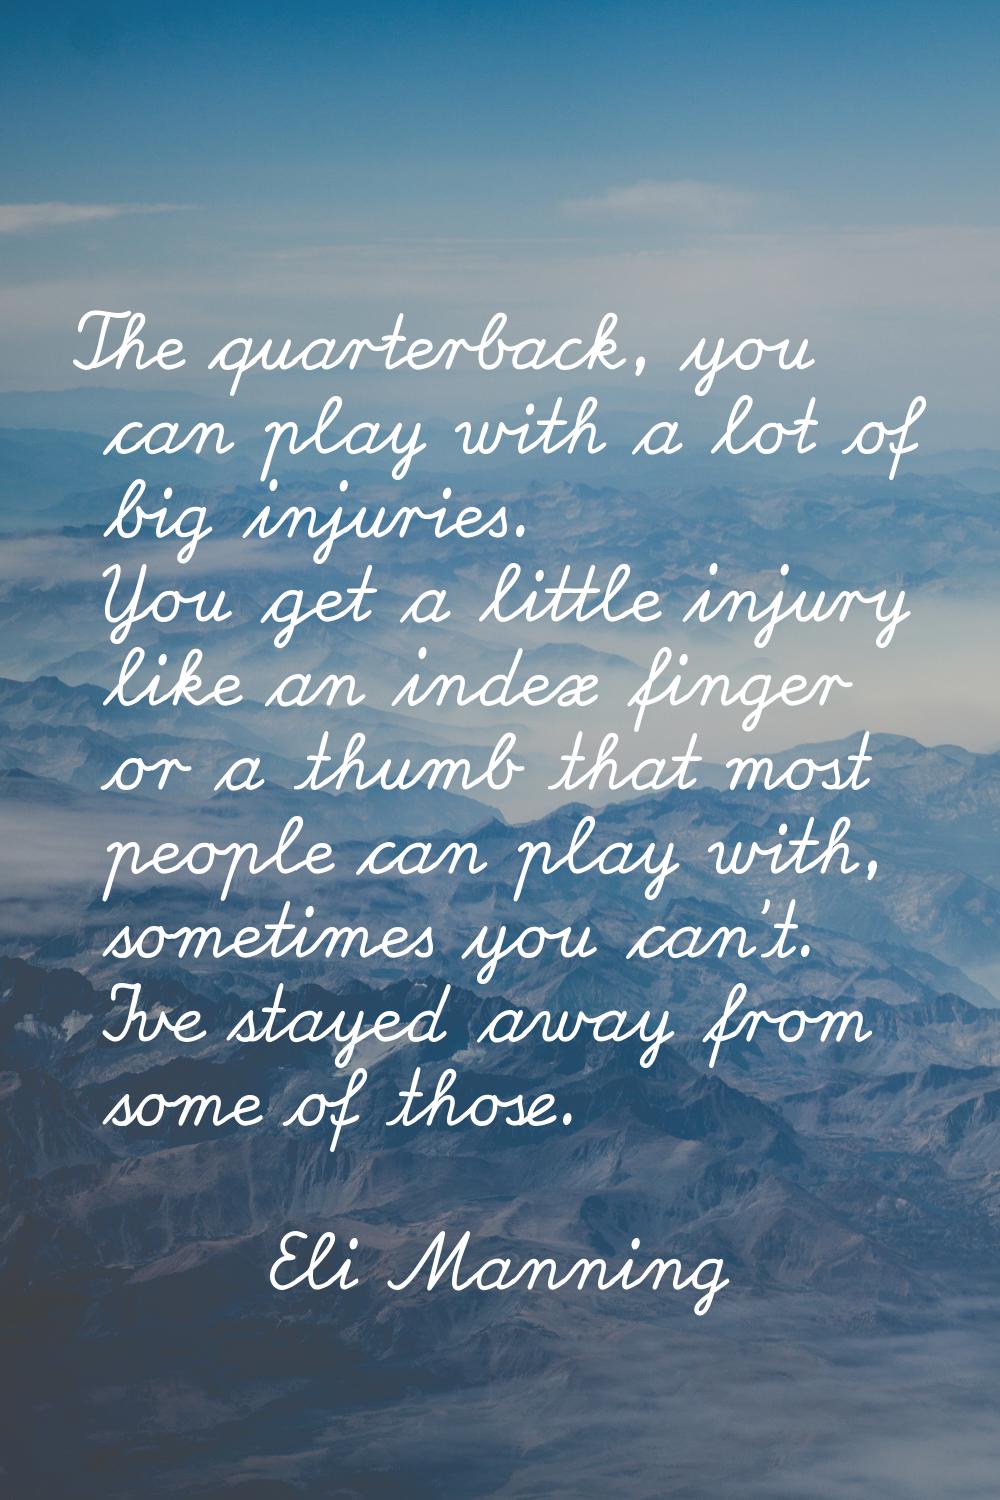 The quarterback, you can play with a lot of big injuries. You get a little injury like an index fin